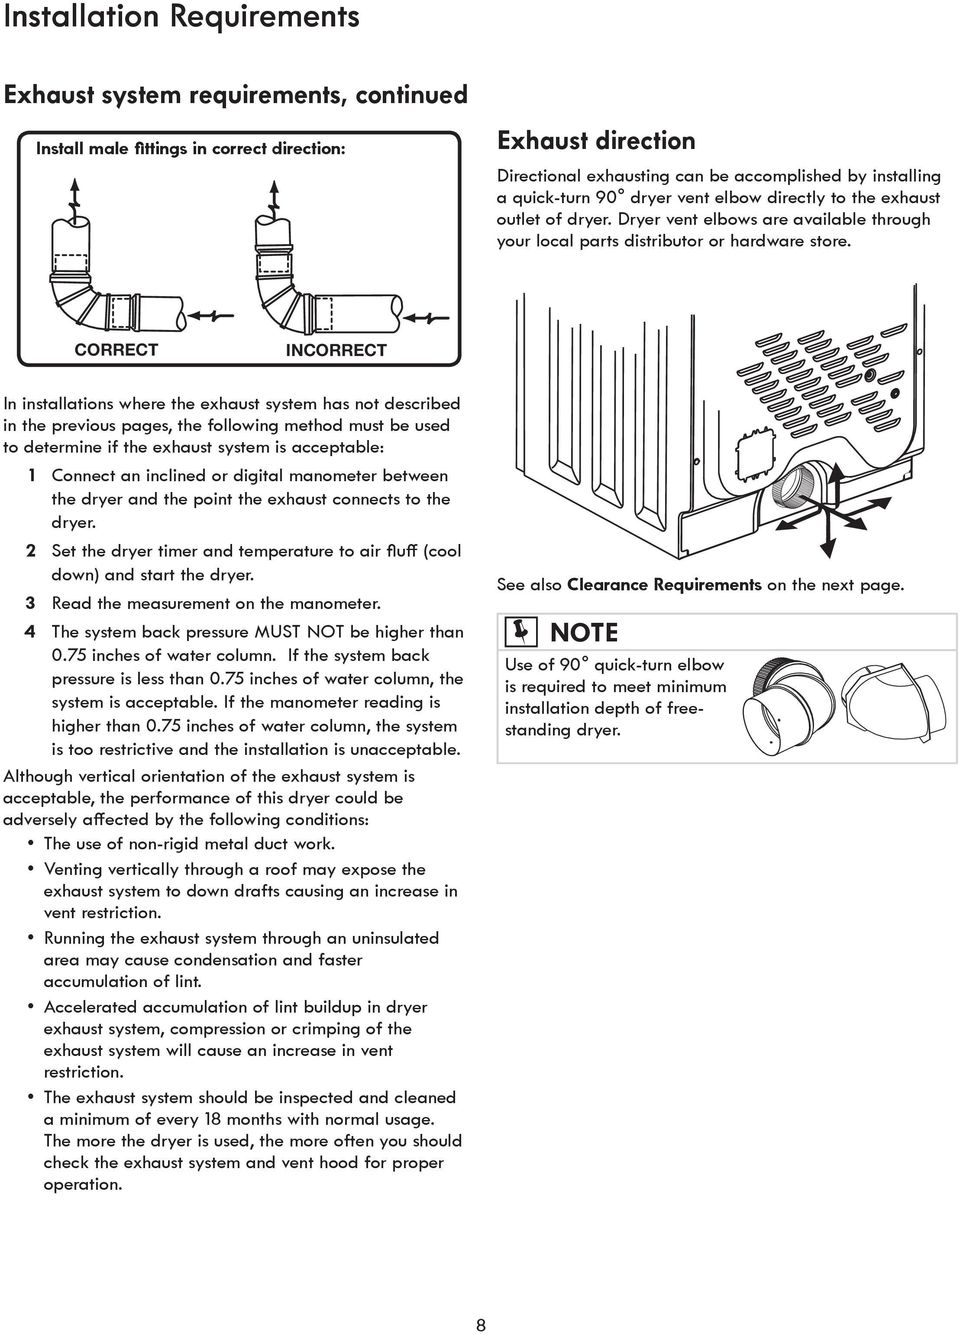 CORRECT INCORRECT In installations where the exhaust system has not described in the previous pages, the following method must be used to determine if the exhaust system is acceptable: 1 Connect an